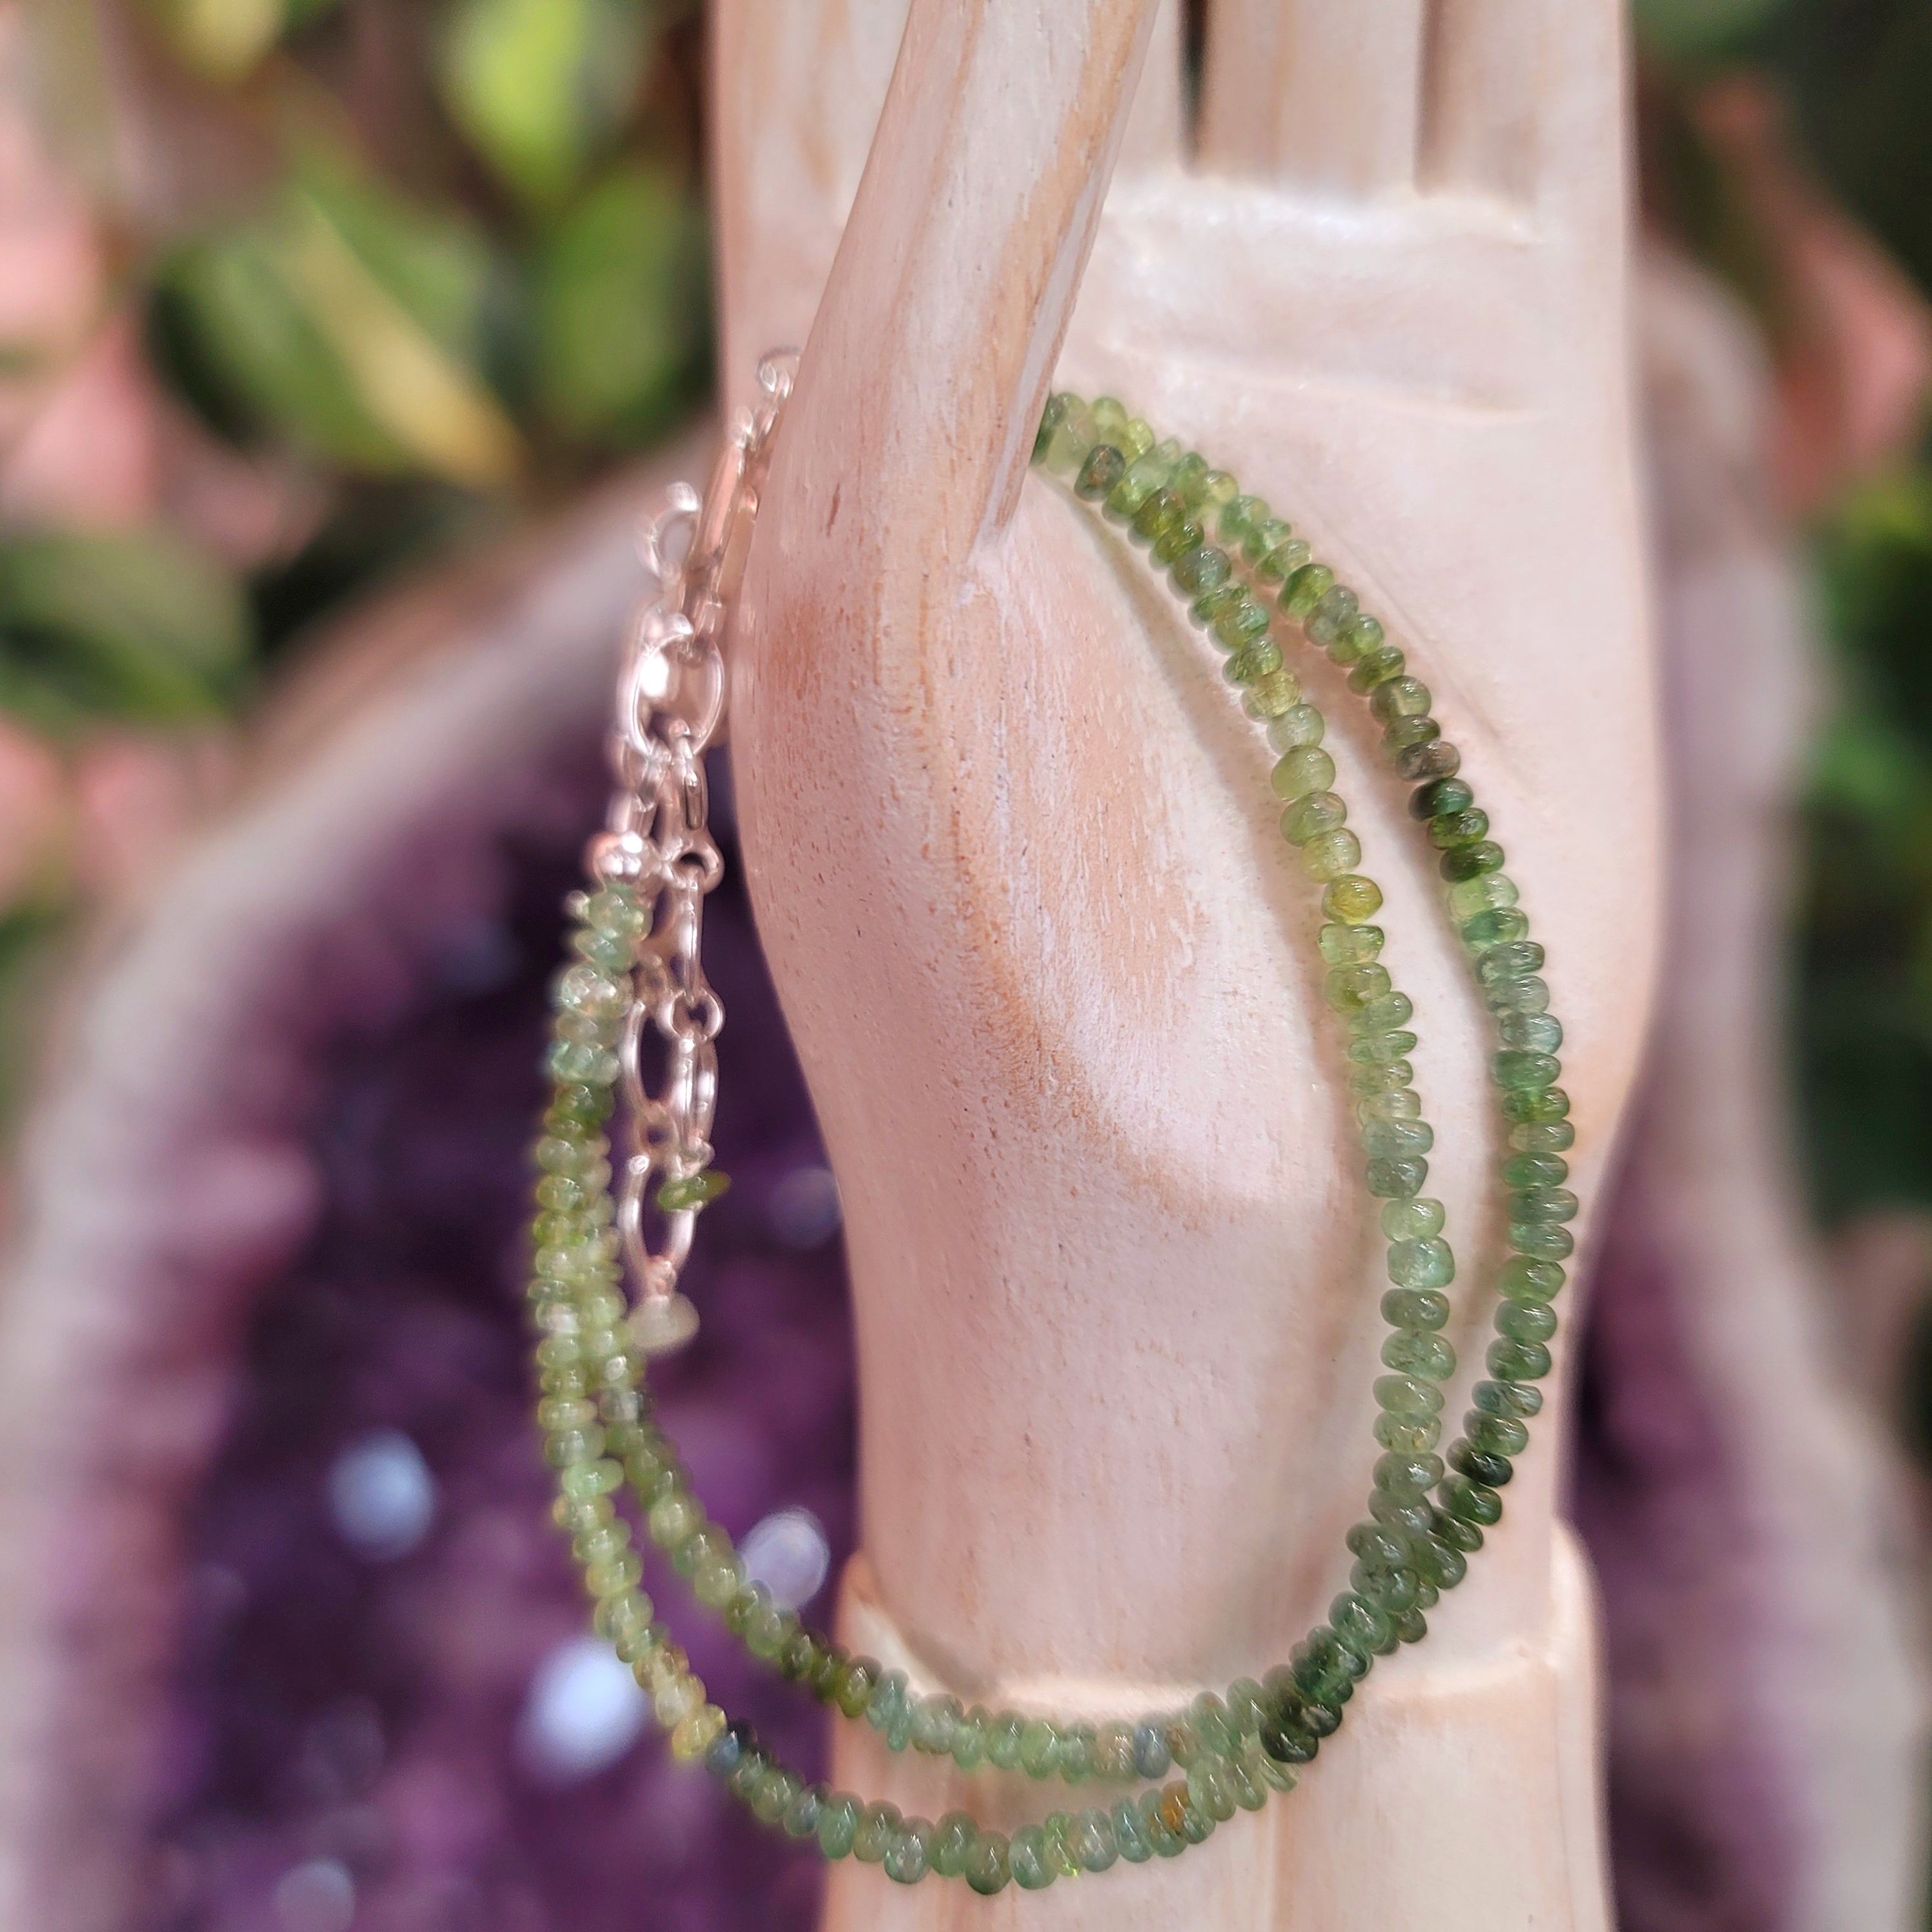 Green Tourmaline Micro Bracelet for Enhancing the Flow of Energy